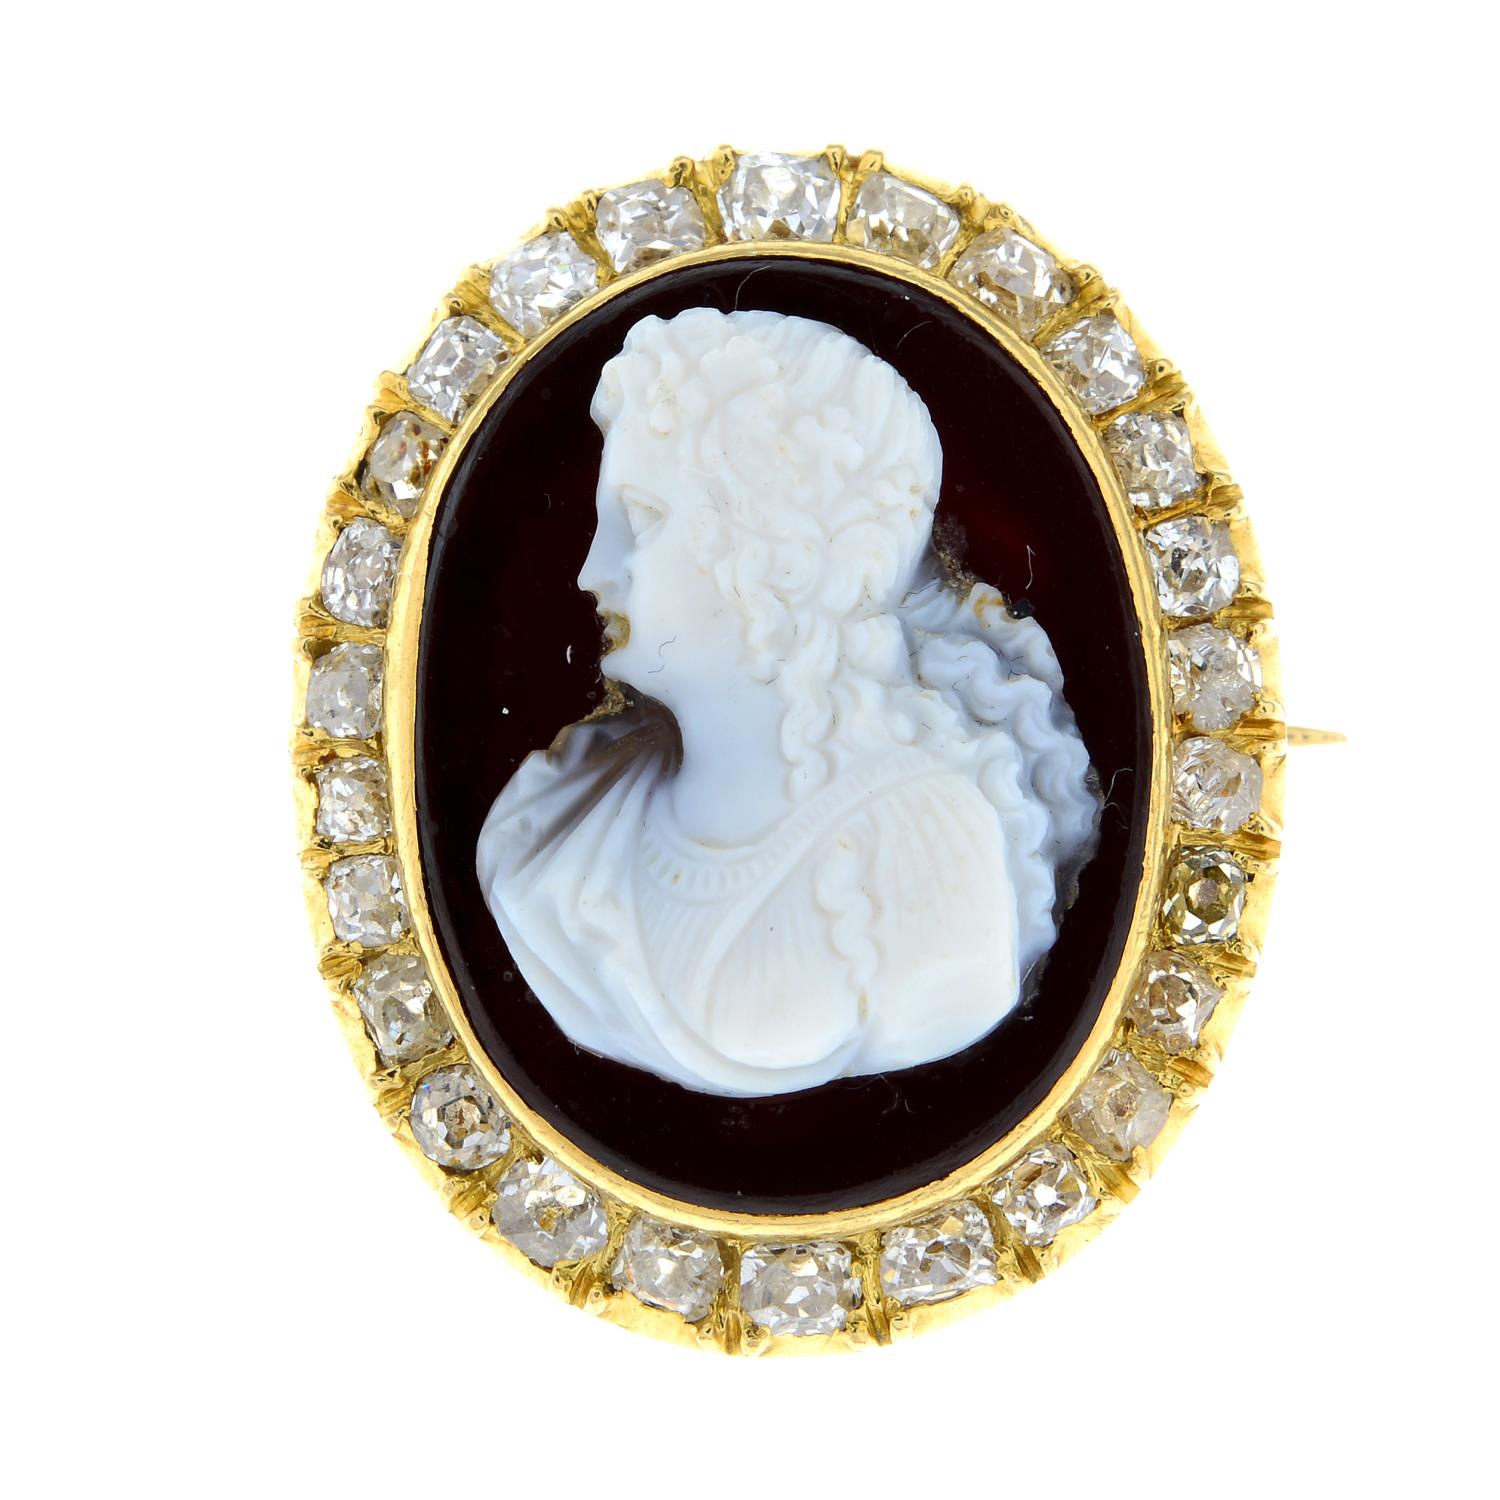 A late 19th century 18ct gold agate cameo and old-cut diamond brooch, depicting a lady in profile. - Image 2 of 5